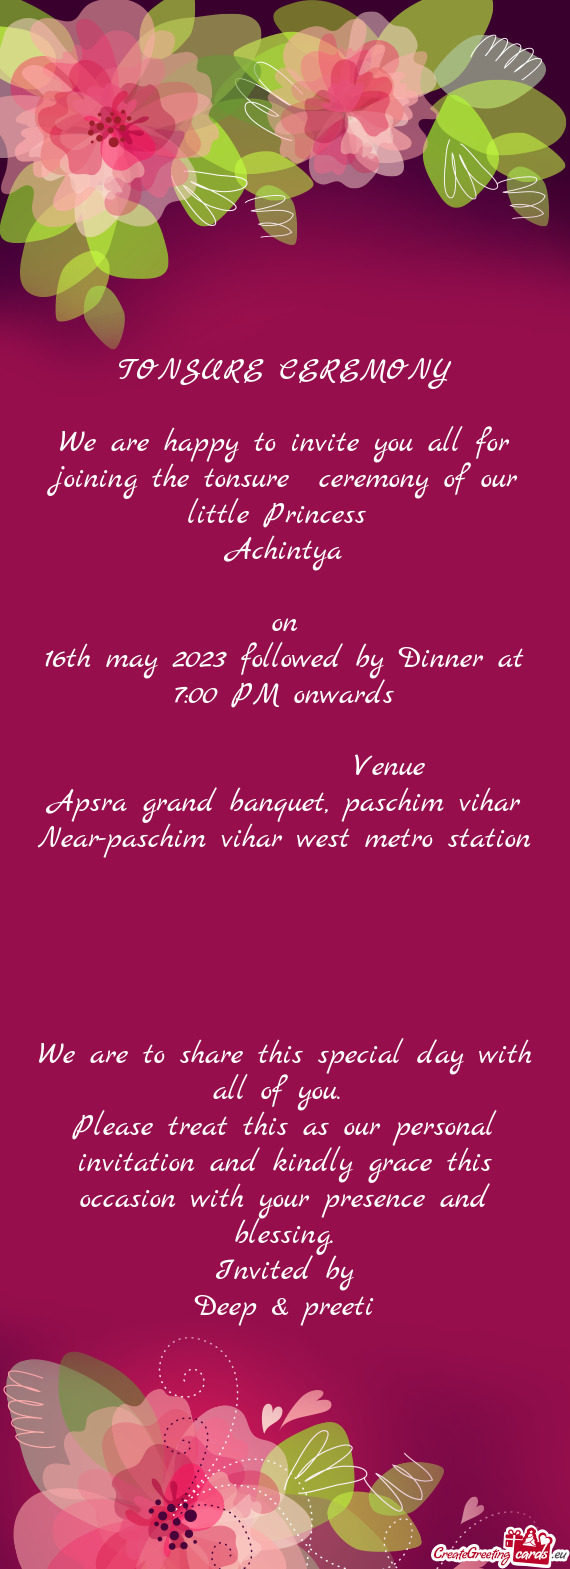 16th may 2023 followed by Dinner at 7:00 PM onwards